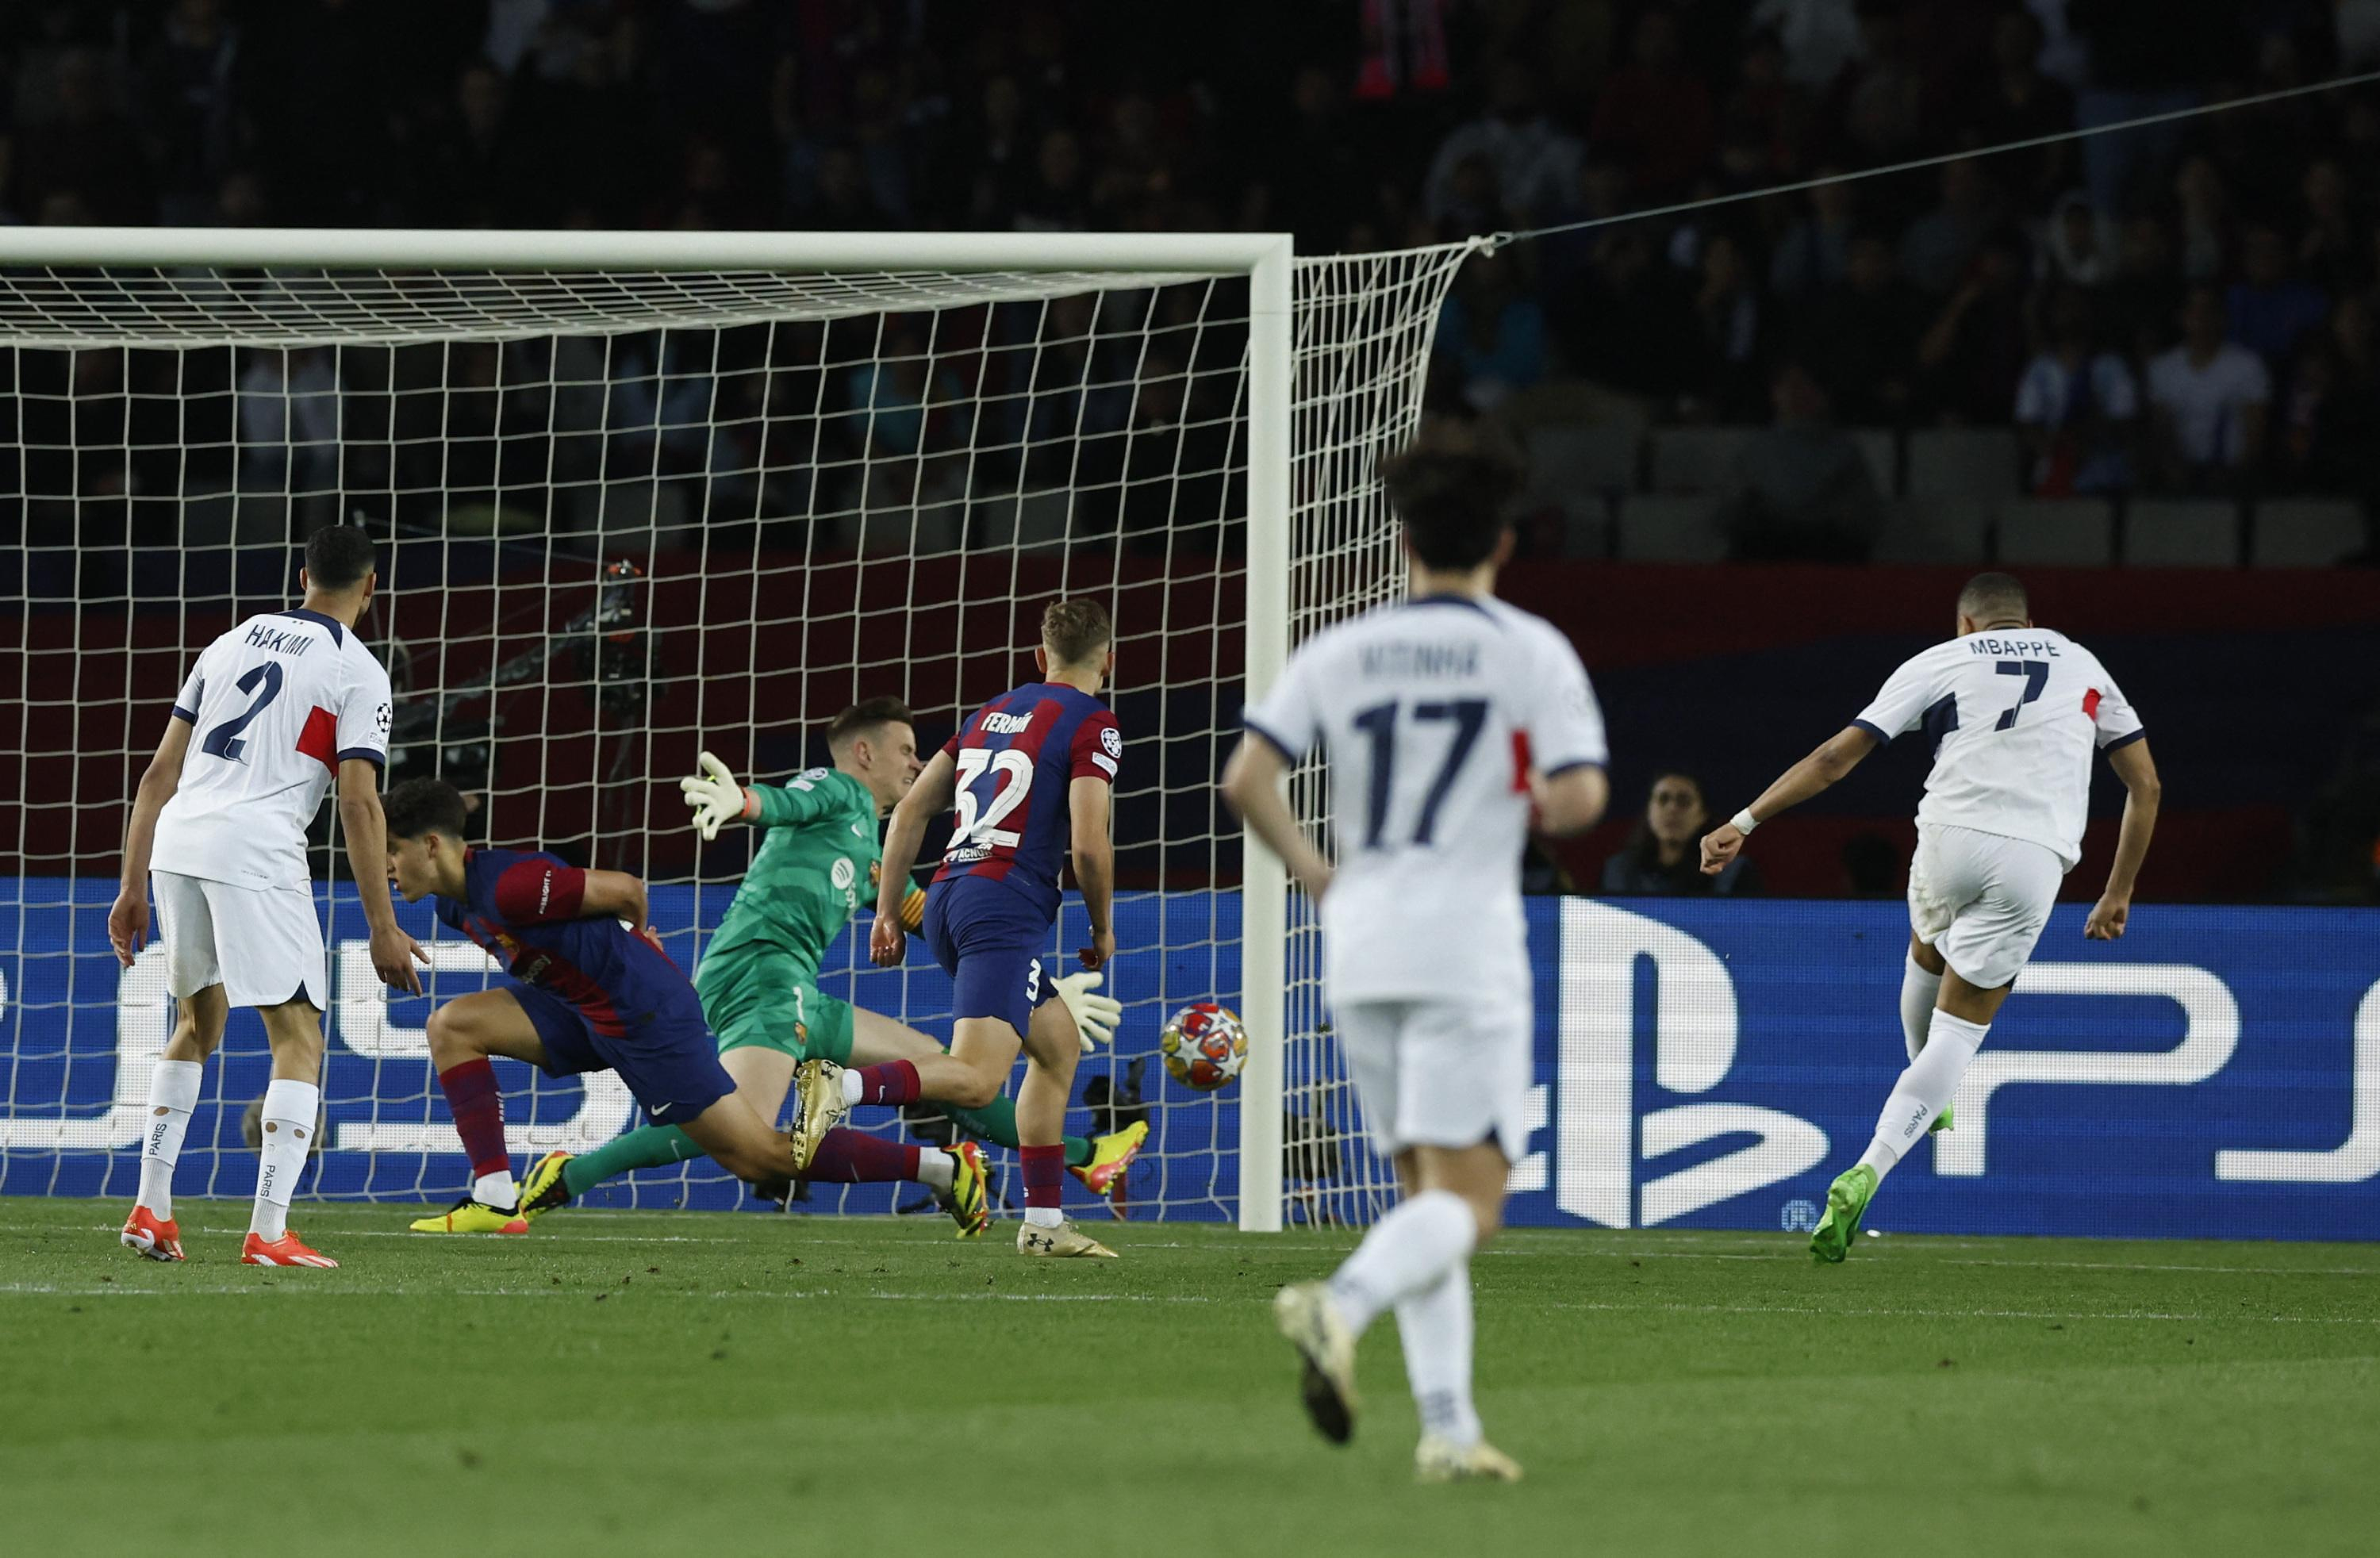 Barcelona-PSG: in video, Mbappe's goal which validates PSG's qualification